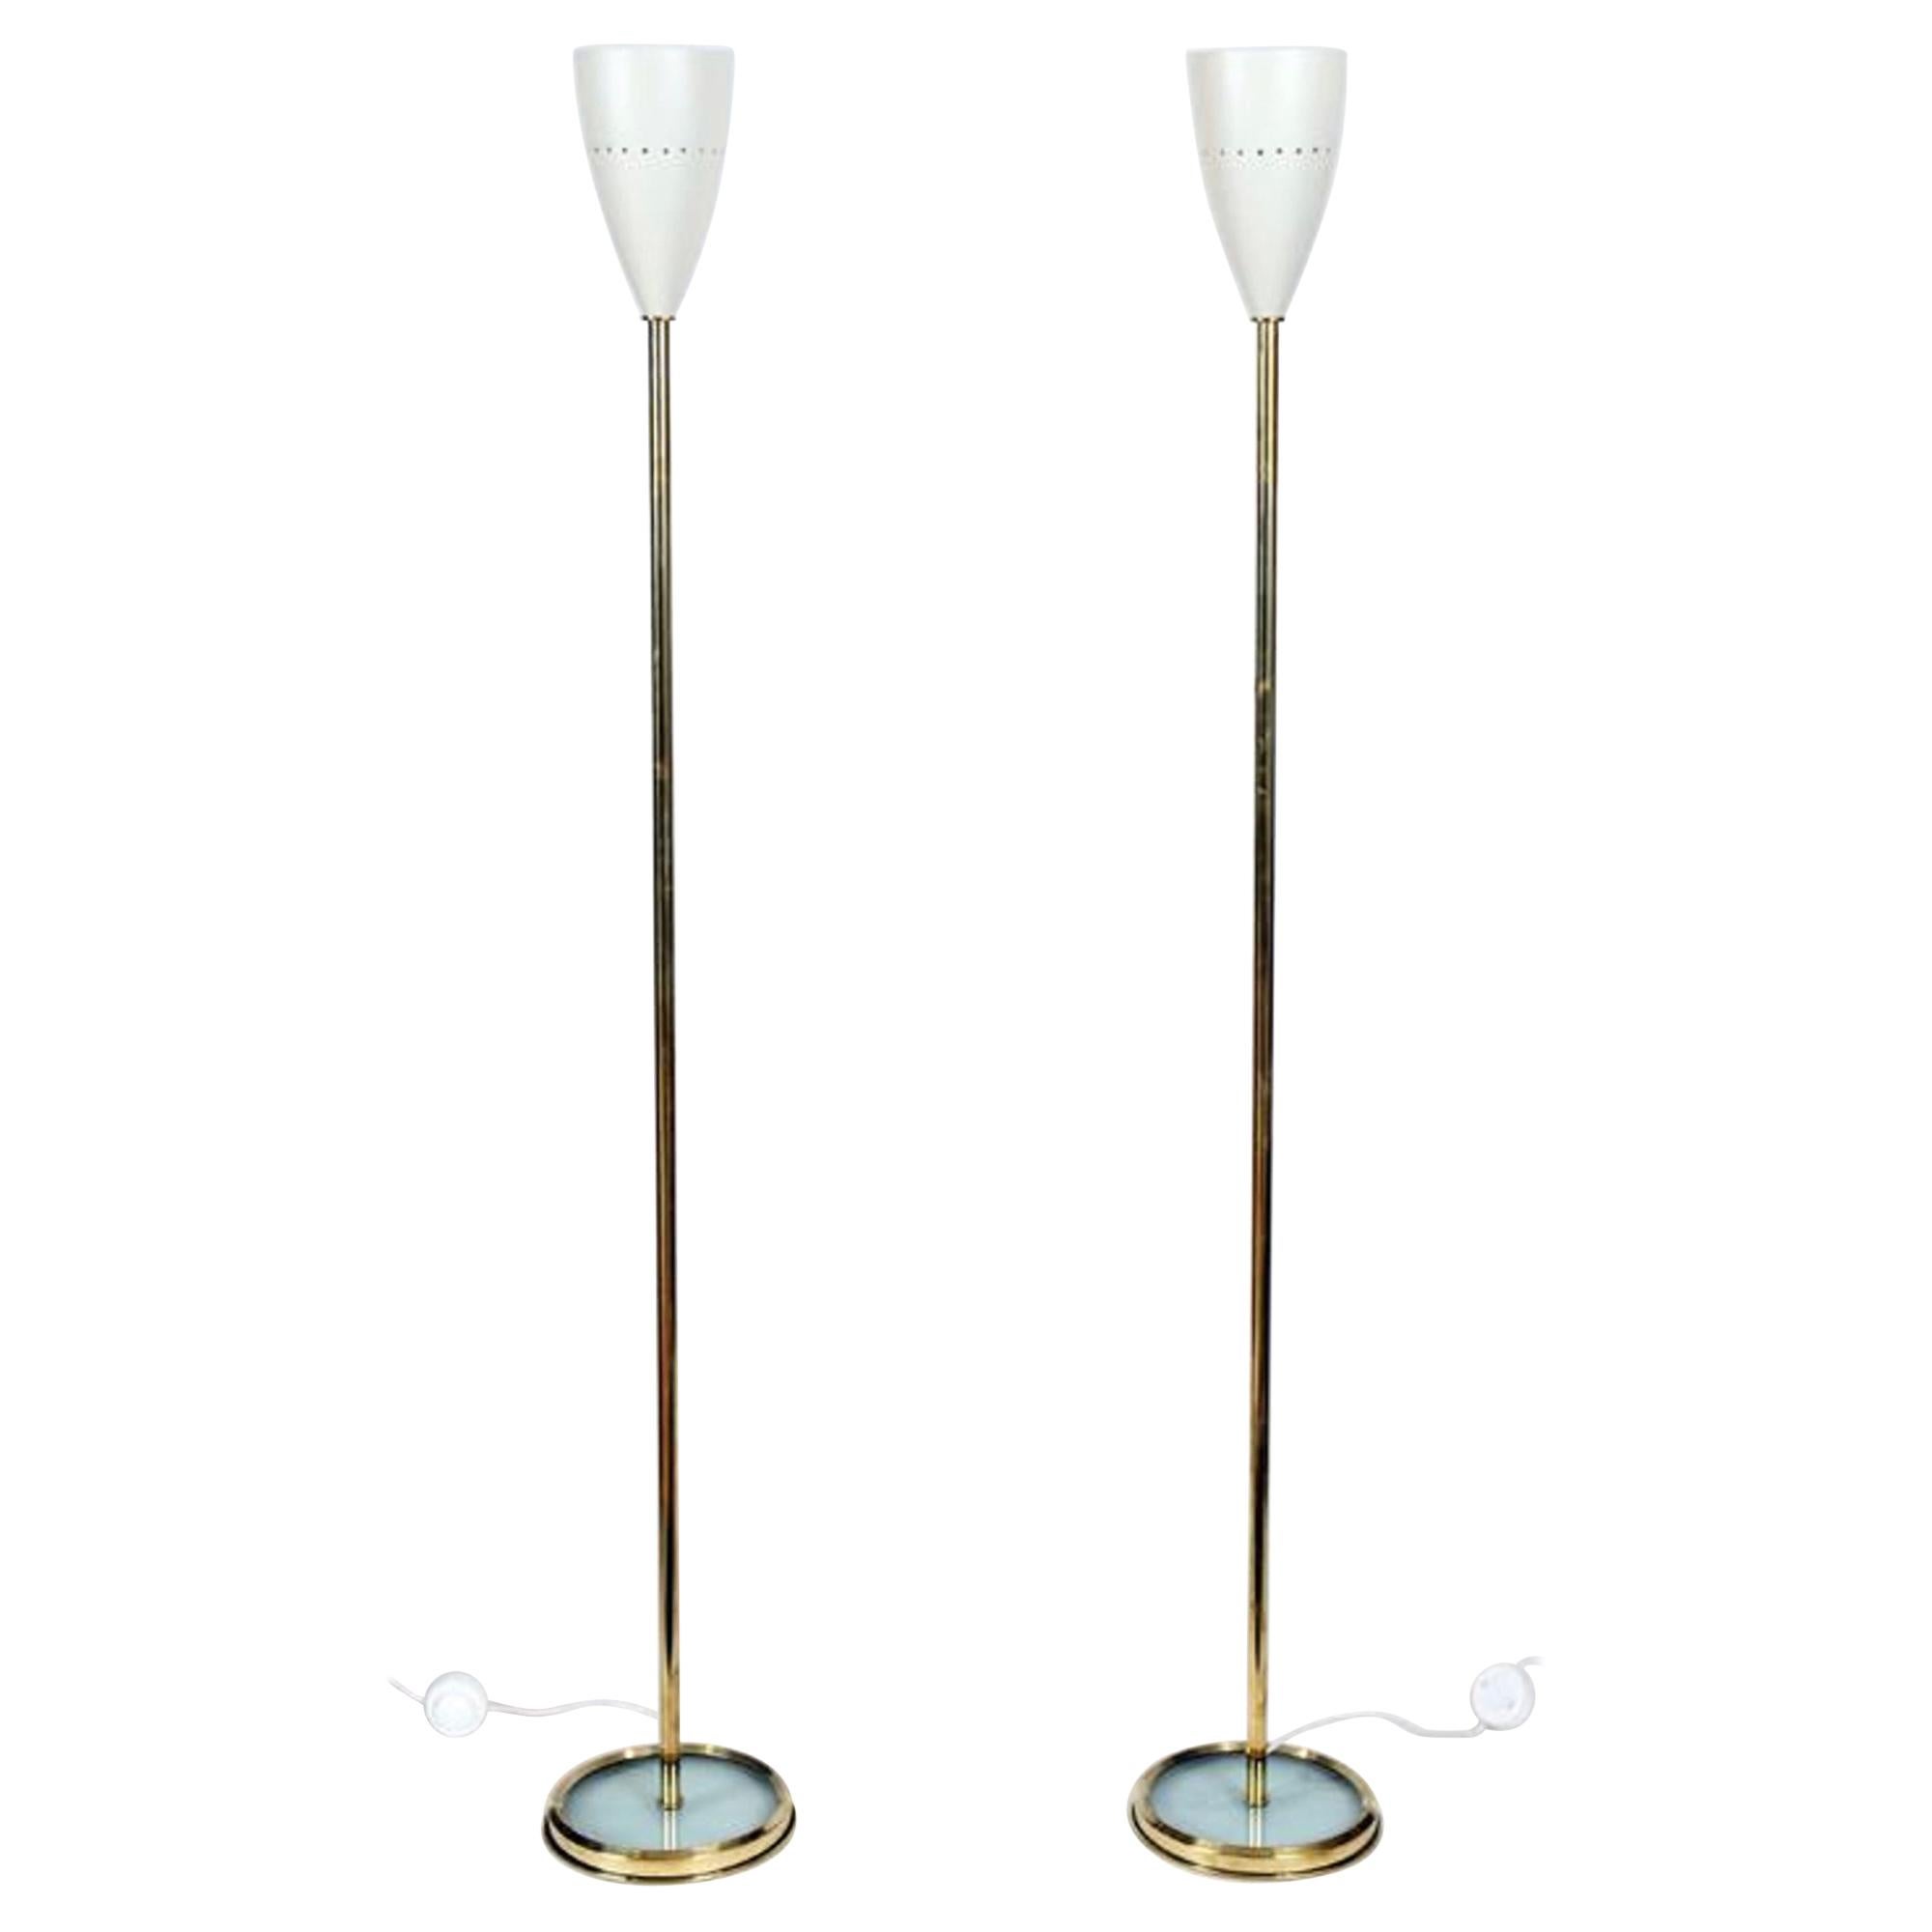 Pair of Italian Brass Floor Lamps with Metal Shades